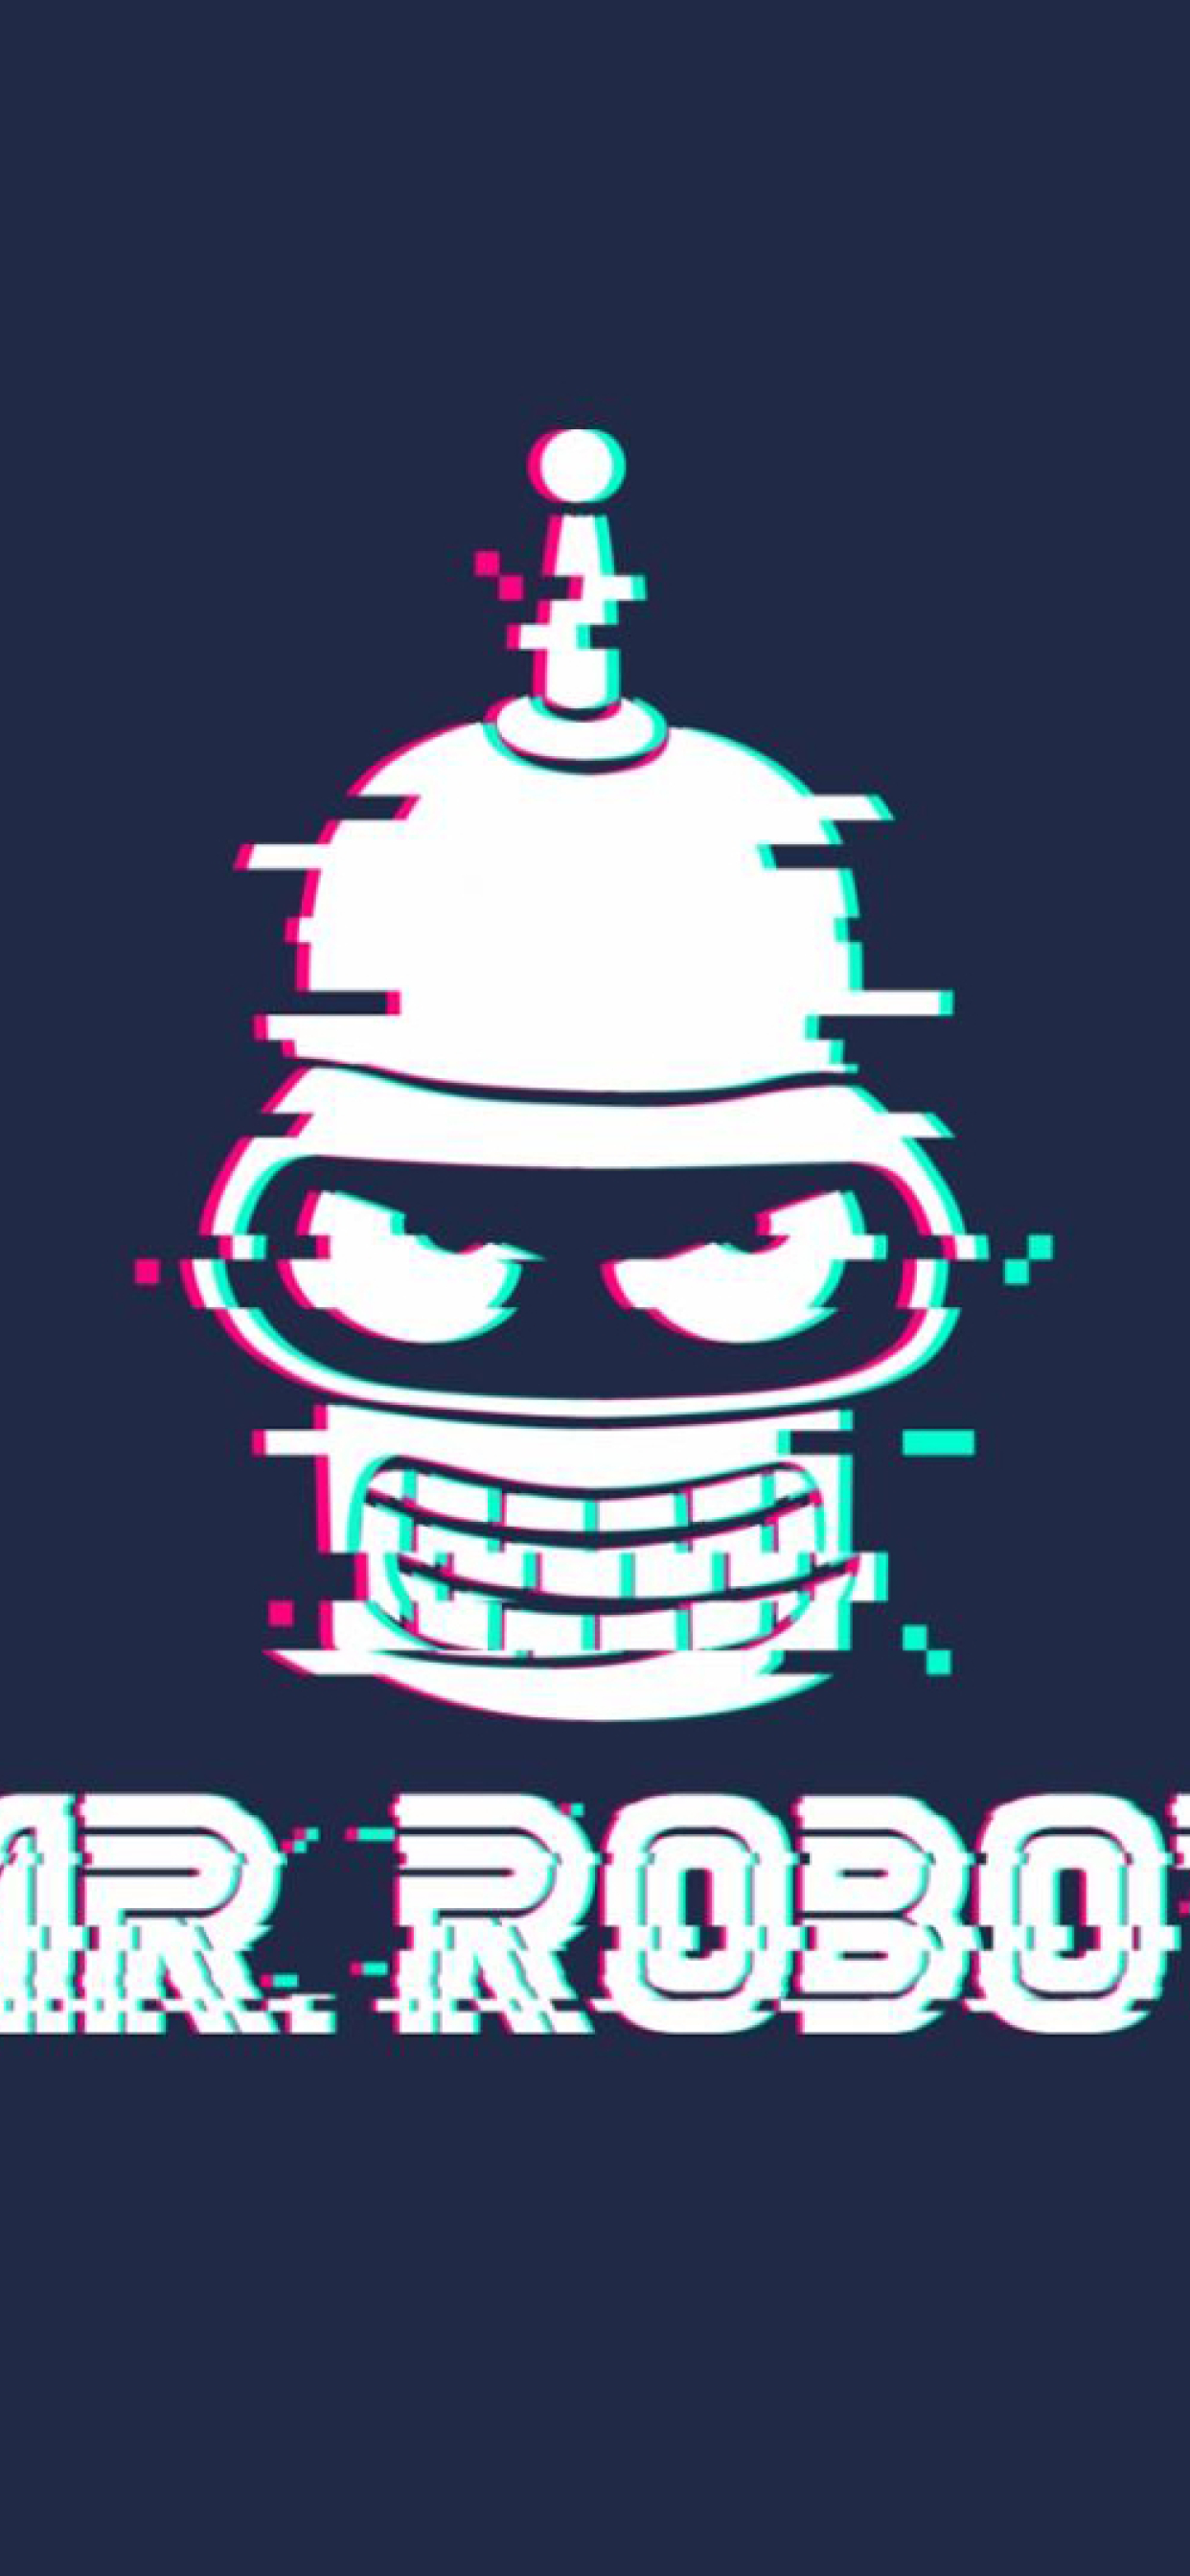 1242x26 Mr Robot Iphone Xs Max Wallpaper Hd Tv Series 4k Wallpapers Images Photos And Background Wallpapers Den